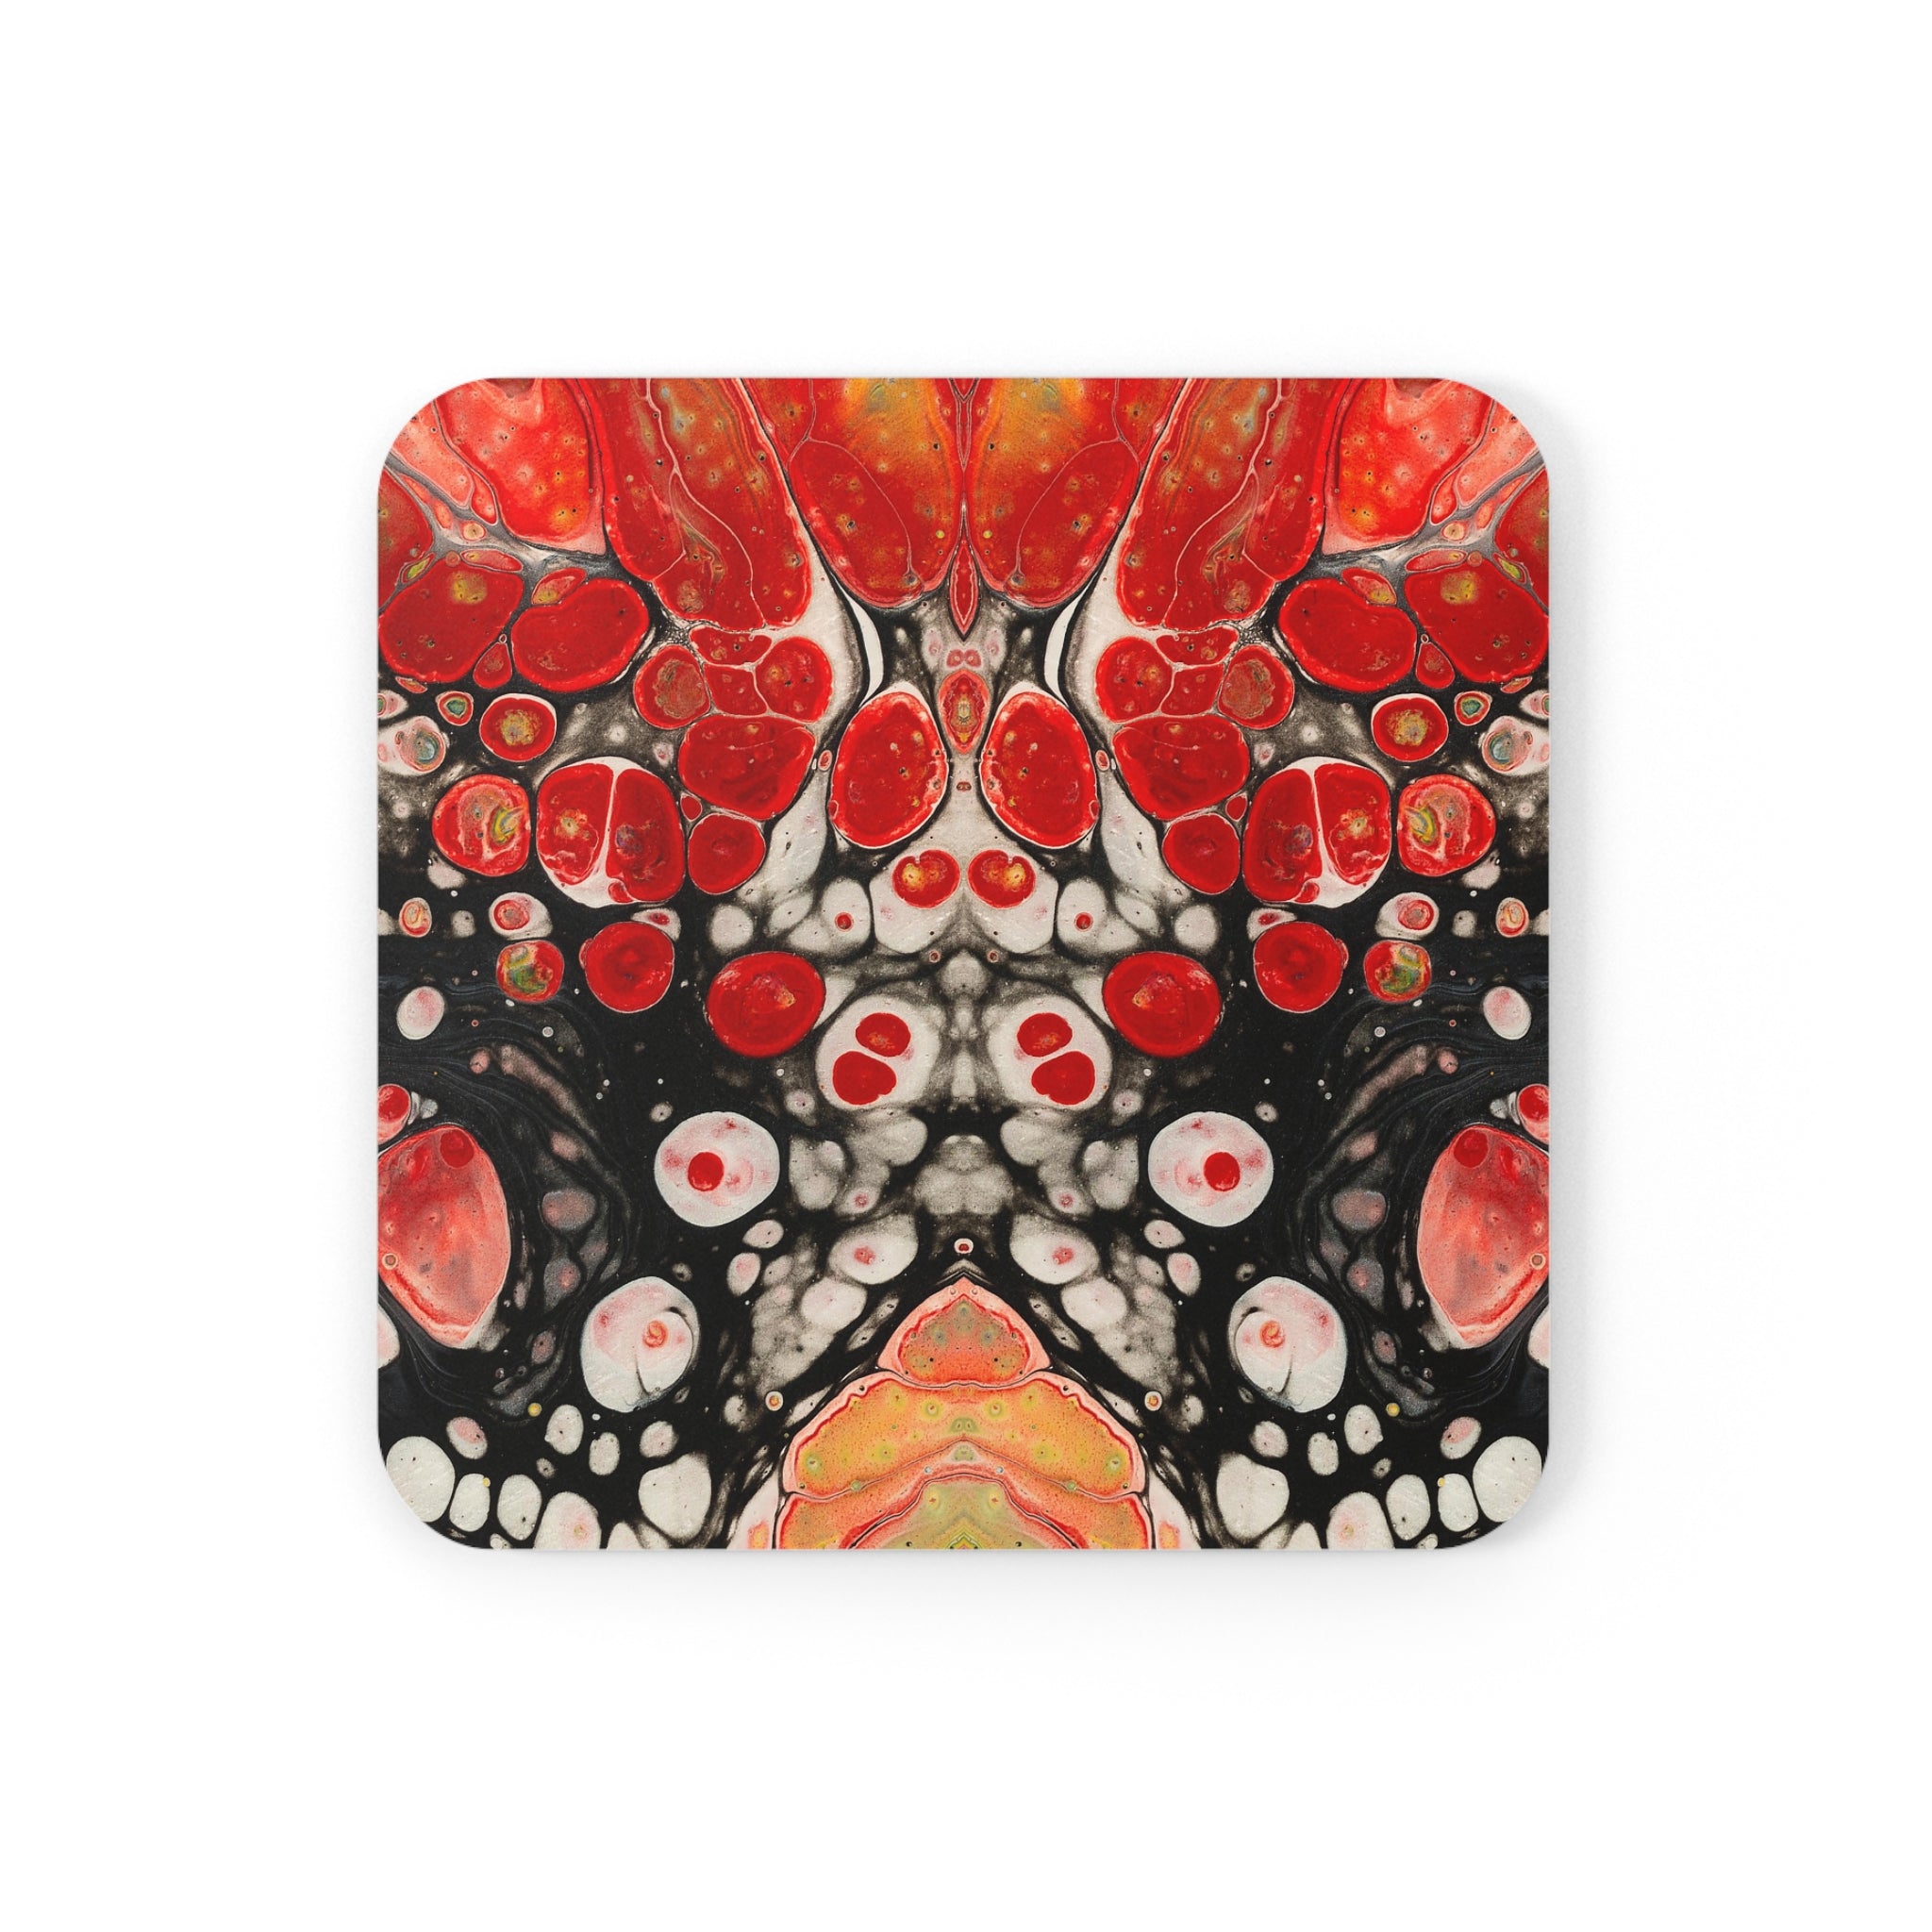 Cameron Creations - Exiting The Chaos - Stylish Coffee Coaster - Square Front